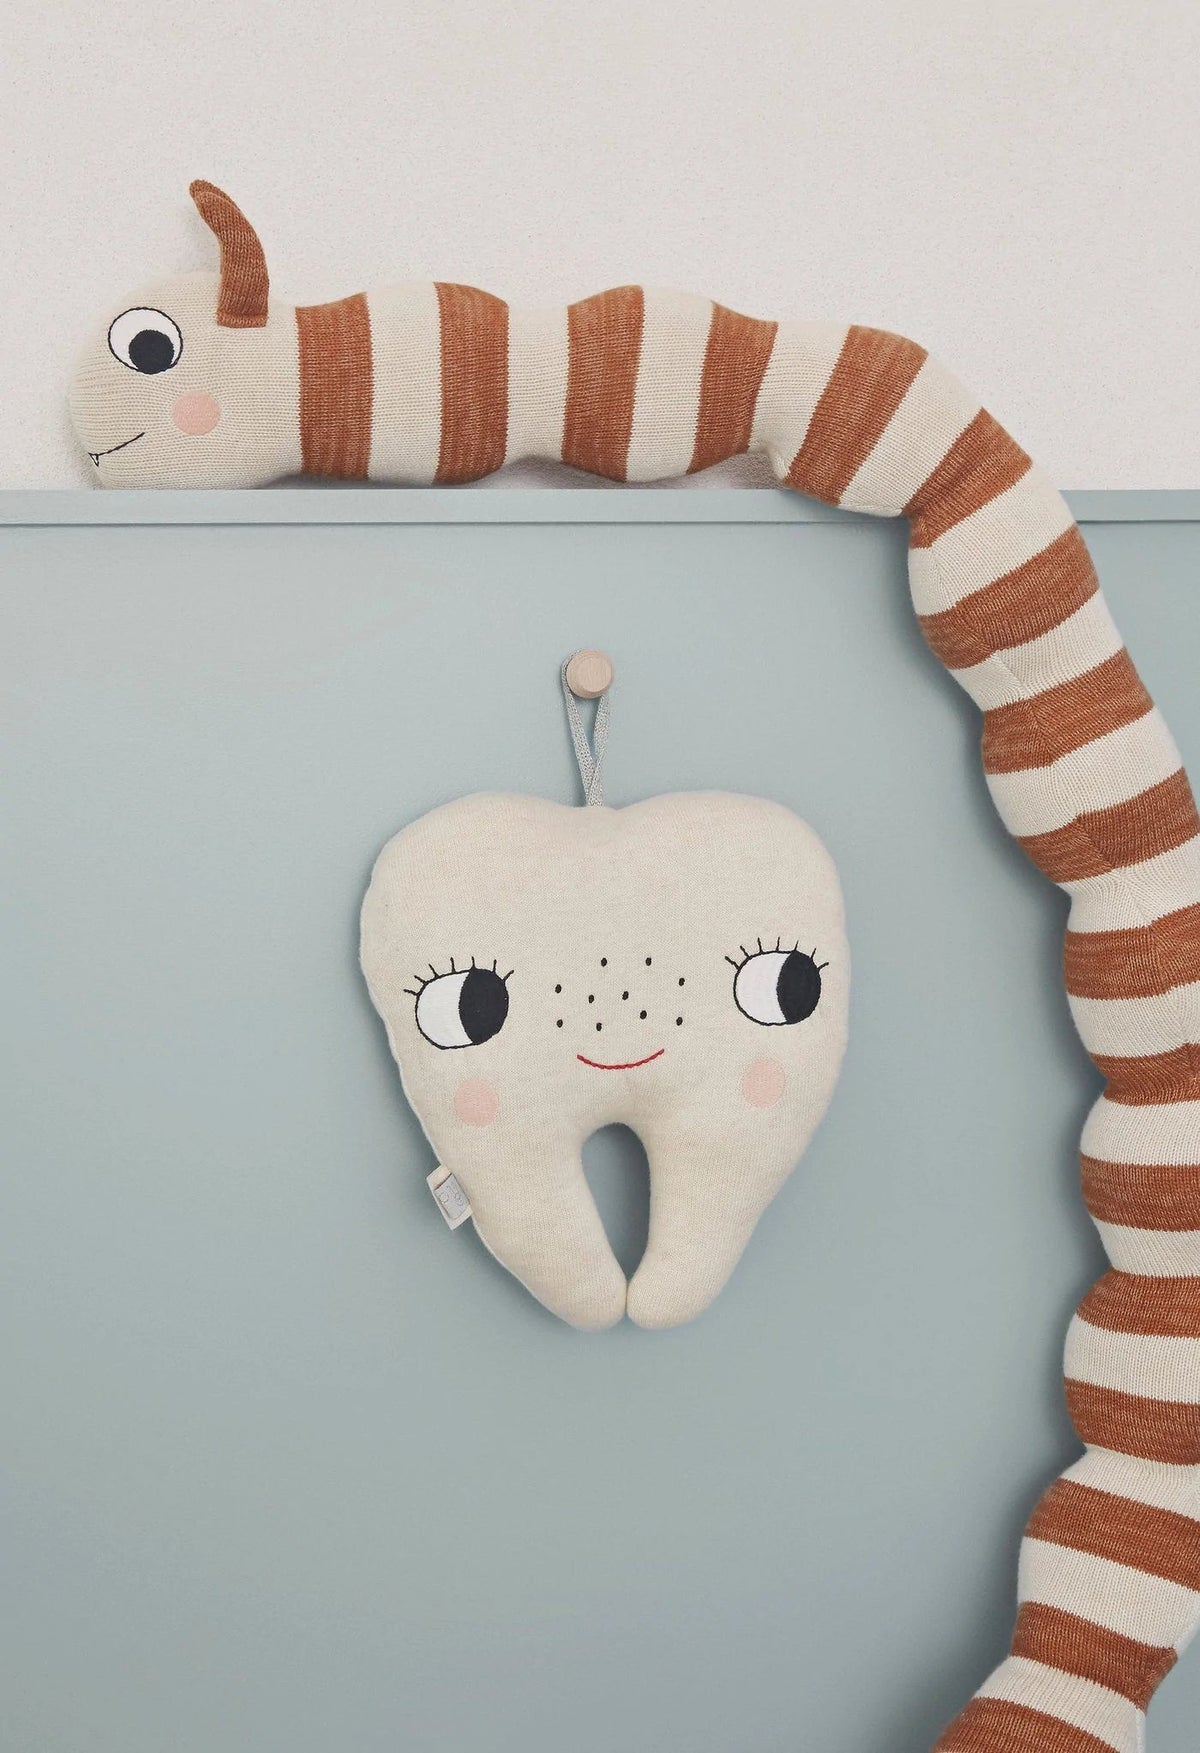 Tooth Fairy | Off White by OYOY - Maude Kids Decor